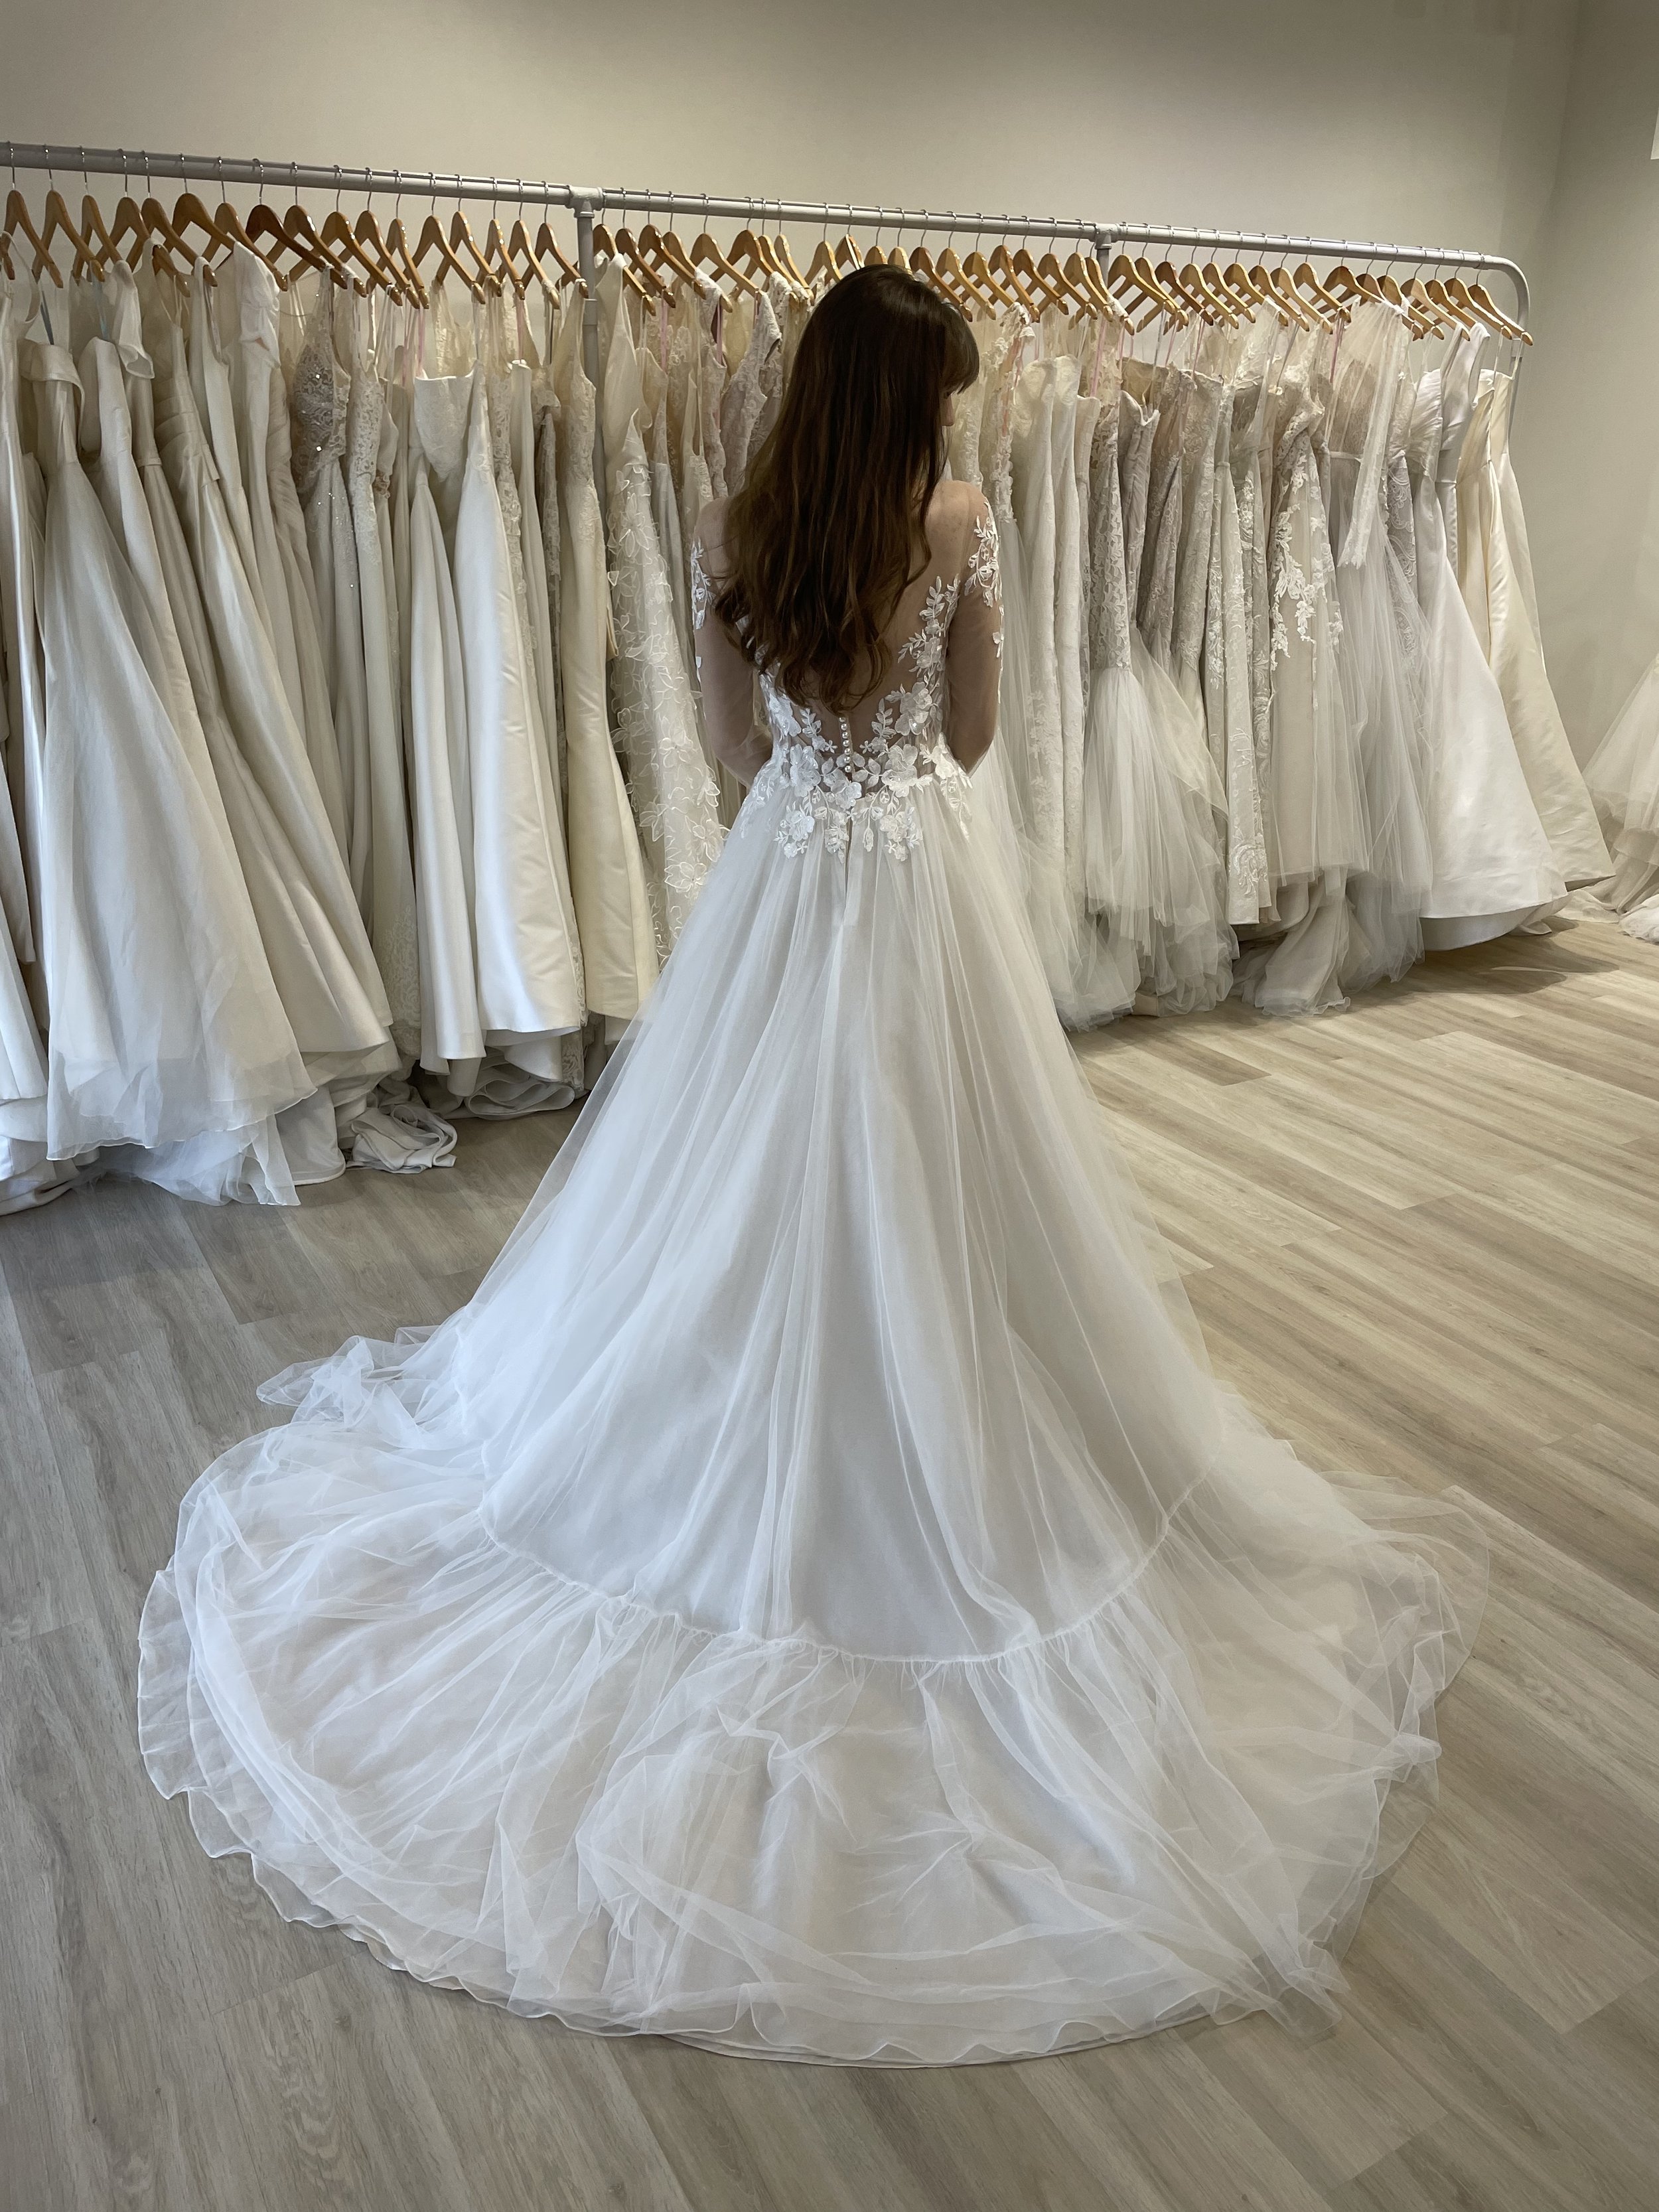 Aura Ines Di Santo Wedding Dress Available for Off The Rack | The ...